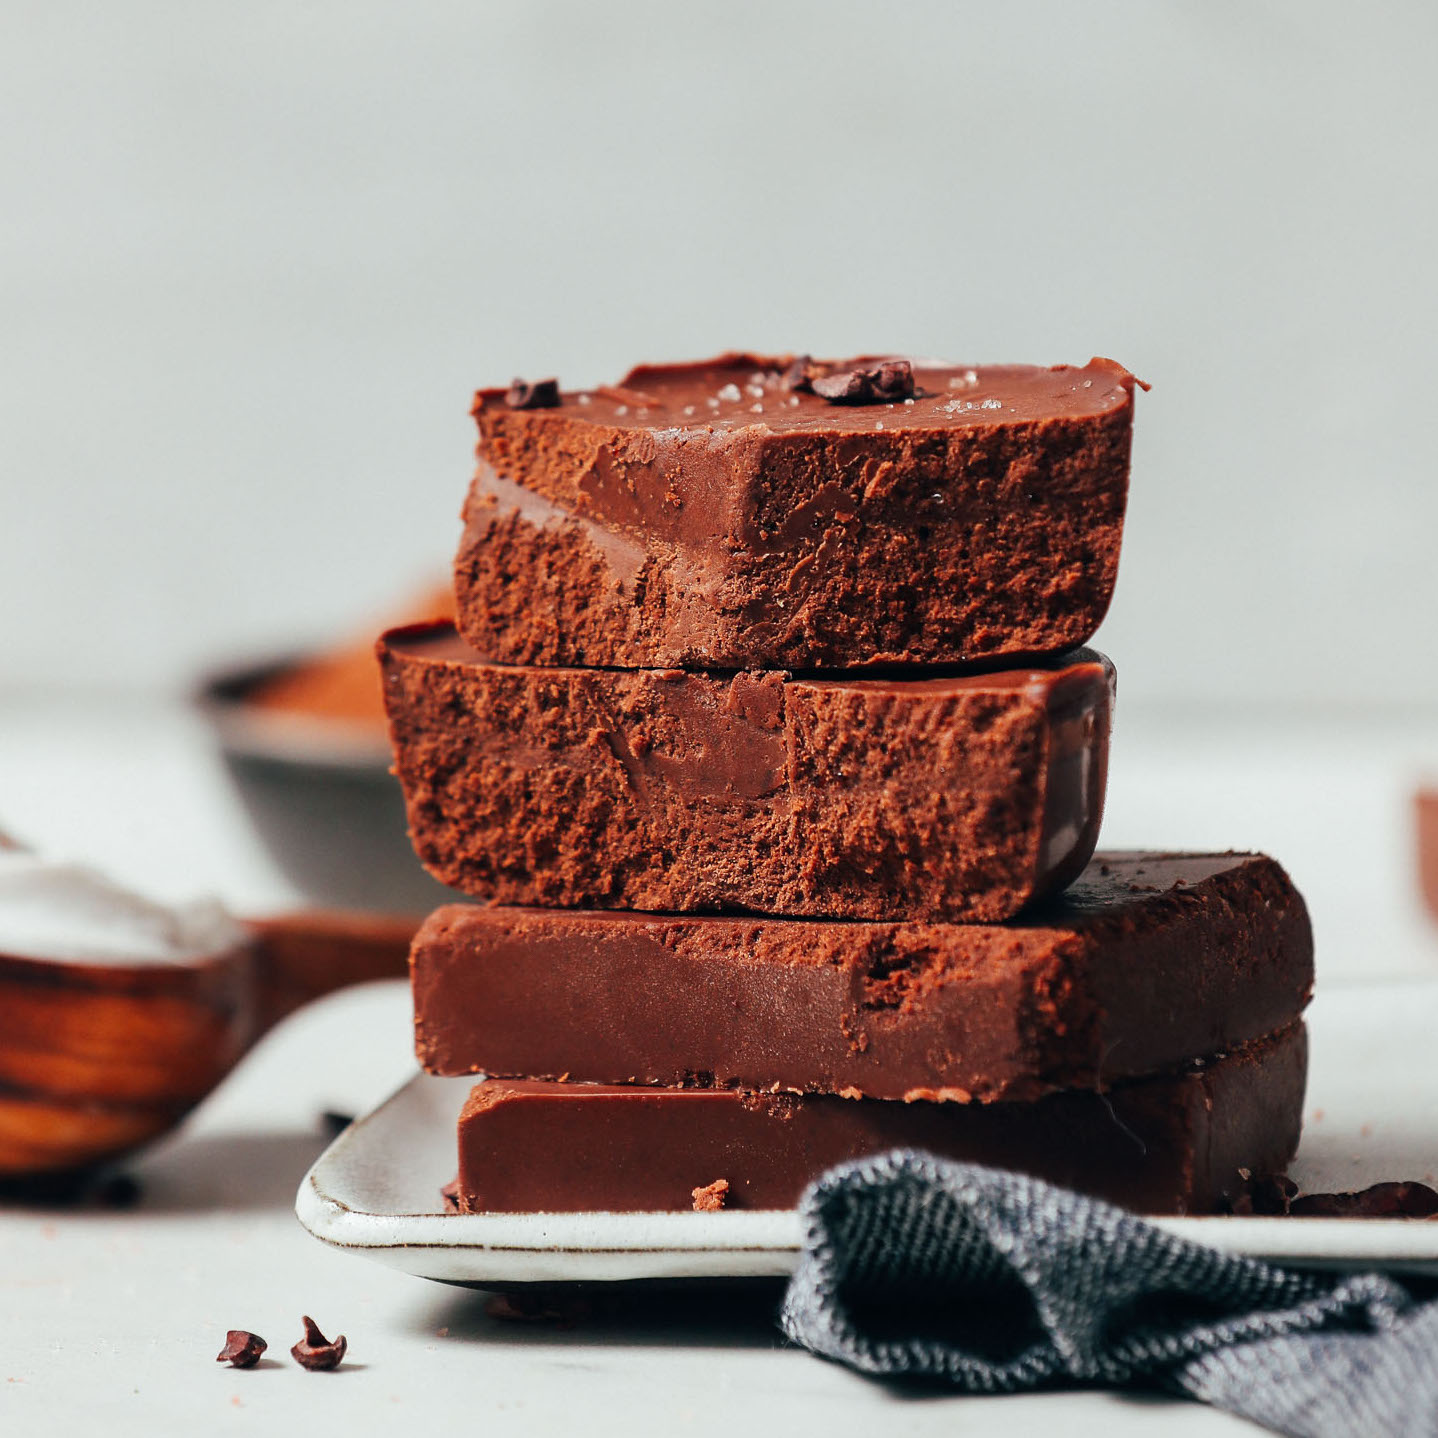 How to take a piece of chocolate without anyone noticing 19 Vegan Chocolate Recipes